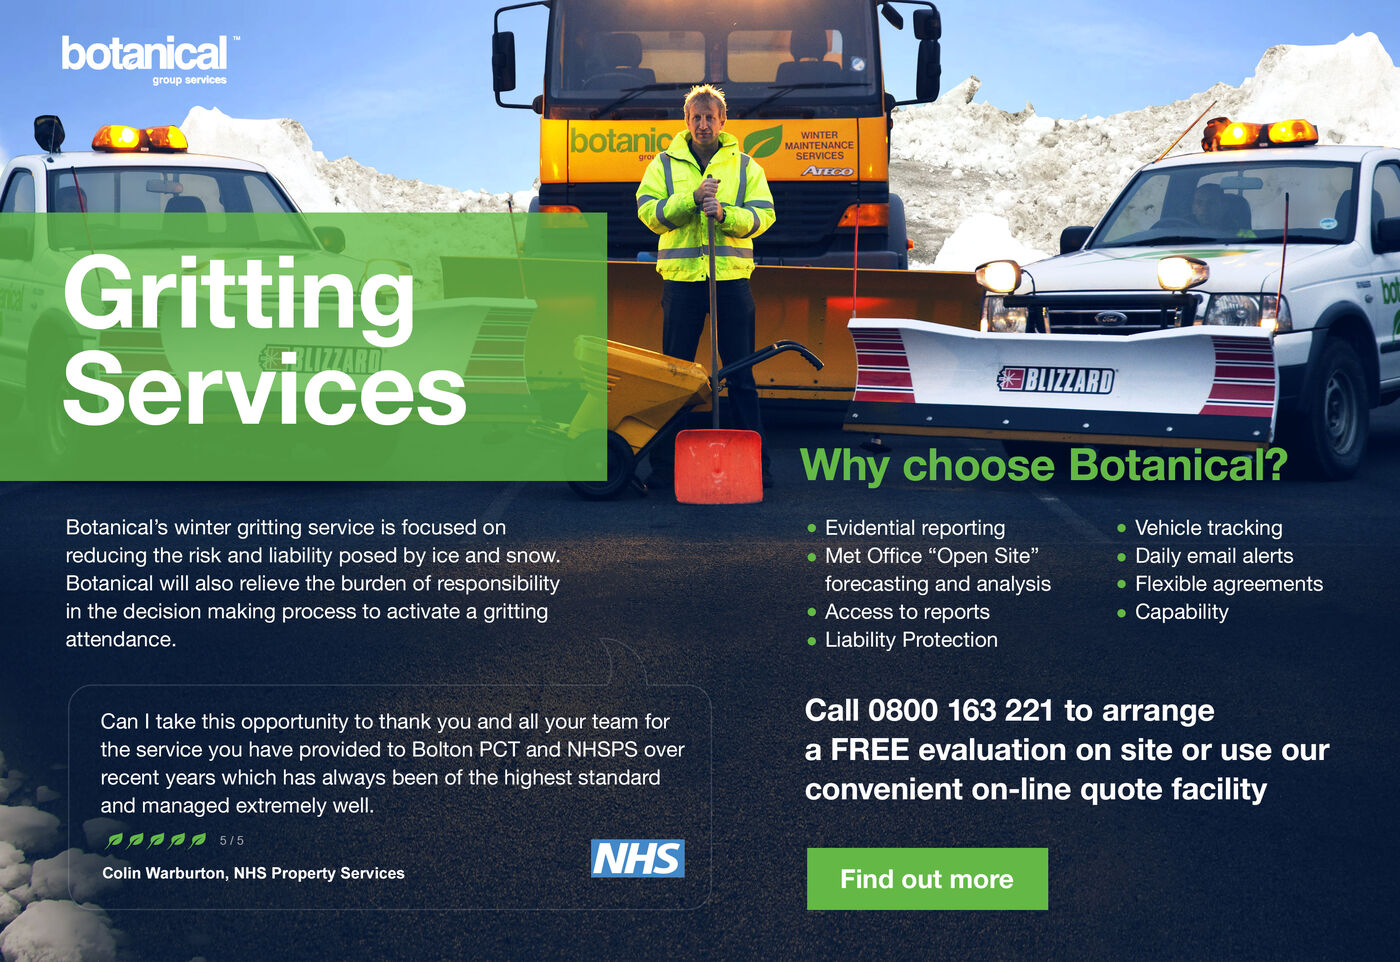 Botanical Group Services Gritting Services